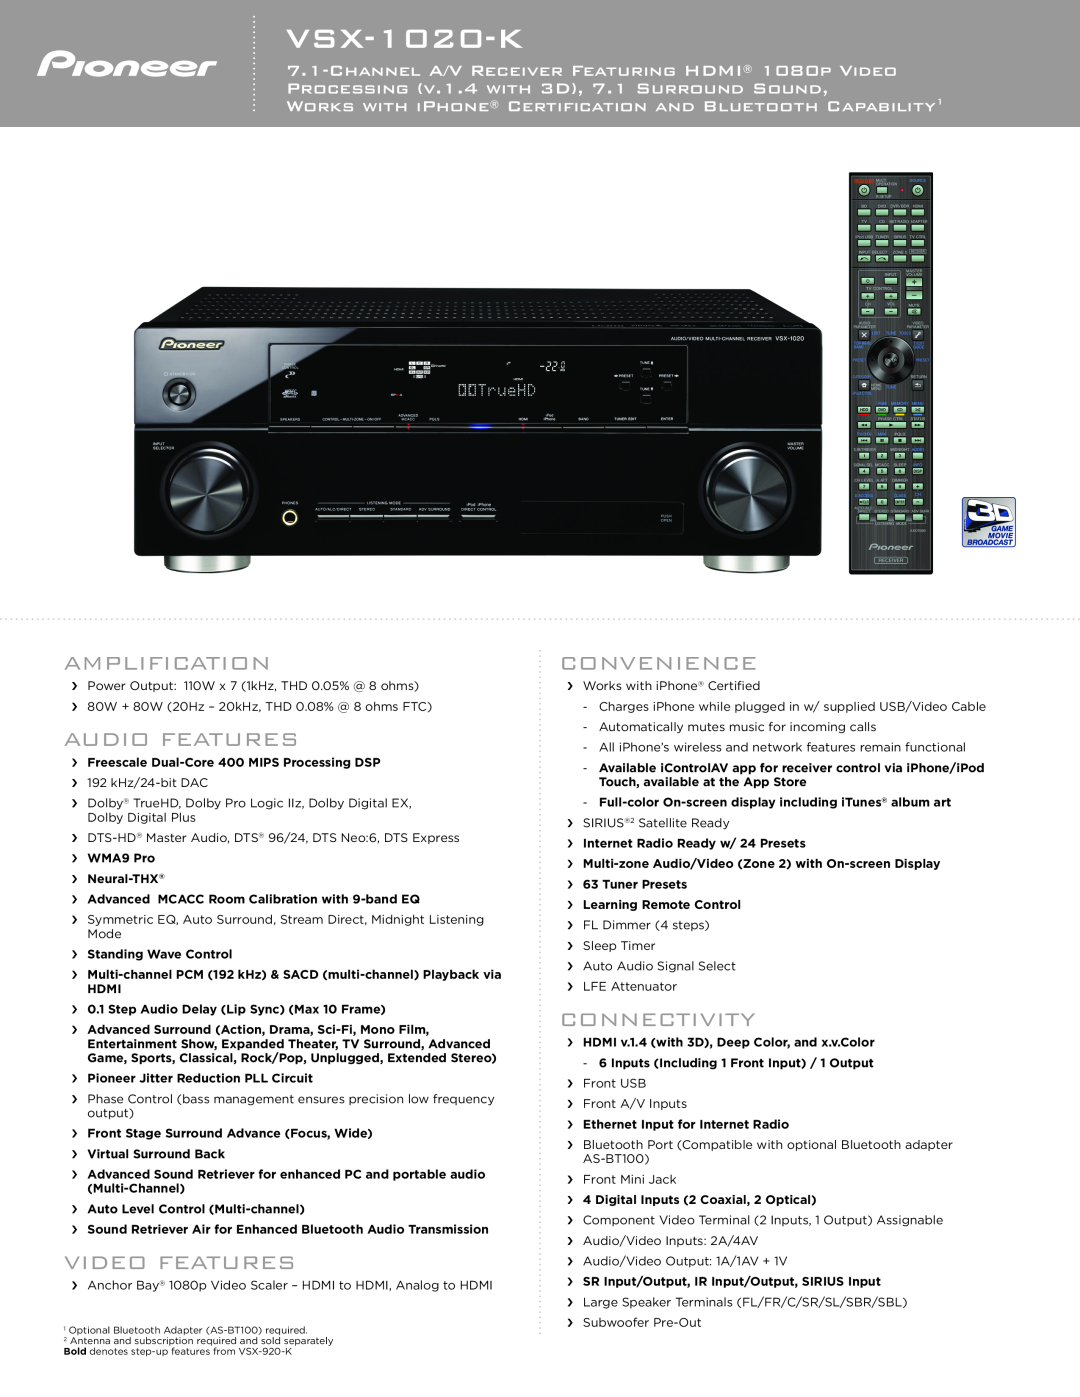 Pioneer VSX-1020-K manual Amplification, Audio Features, Video Features, Convenience, Connectivity 